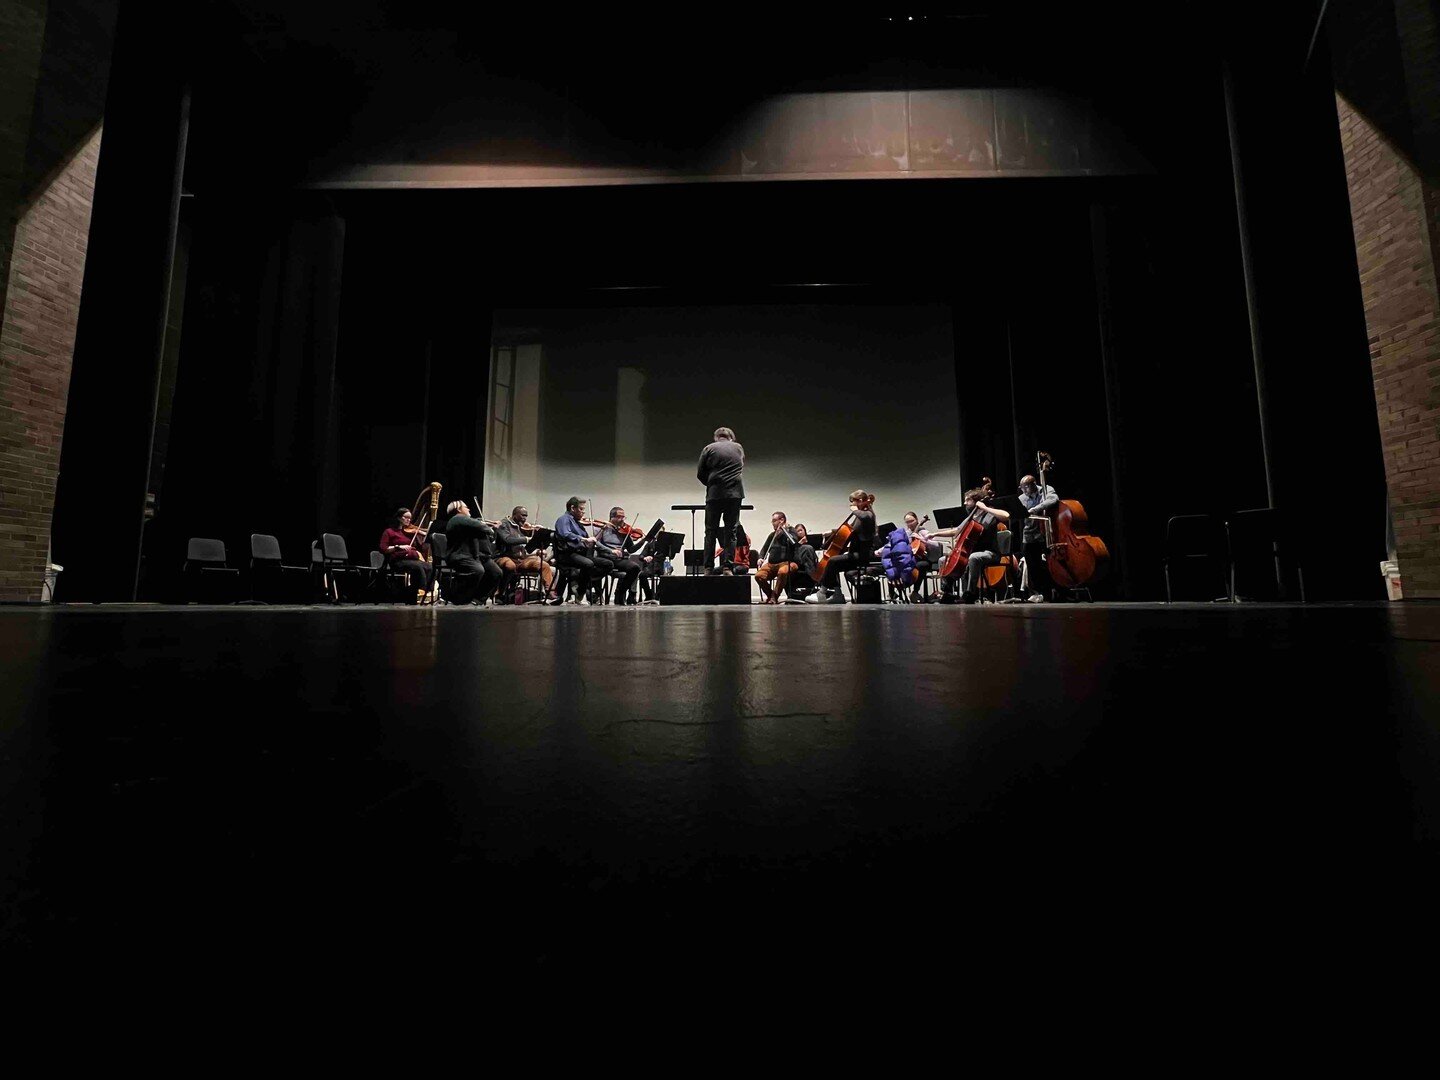 Rehearsals are underway for our concert: &ldquo;A Confluence of Cultures: Copland, Mahler, Hernandez&rdquo;. Expect to see more!

You can join us on Dec. 14th at 7:00pm at Aaron Davis Hall, City College of New York and register at adca.eventbrite.com